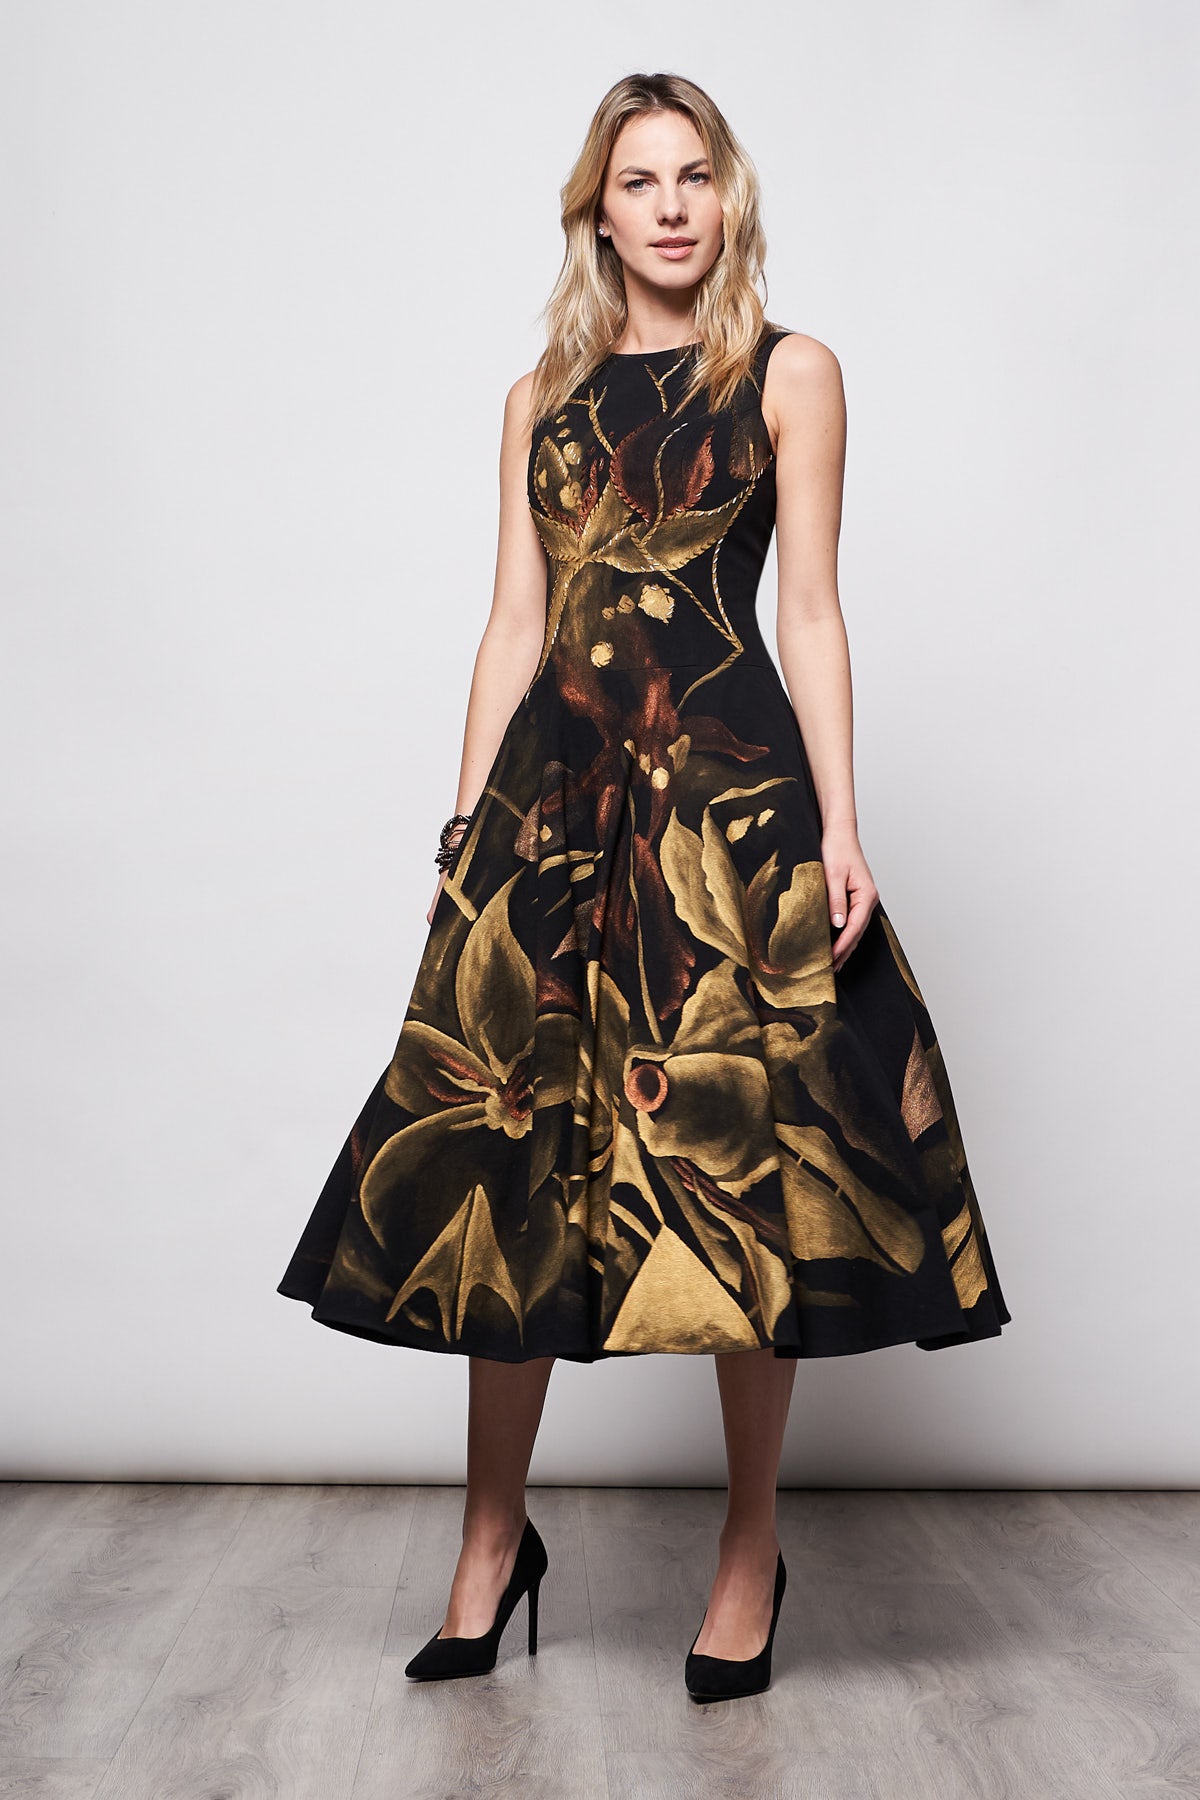 HAND-PAINTED AND HAND-EMBROIDERED FLORAL BELL MIDI DRESS - GOLD FLORES